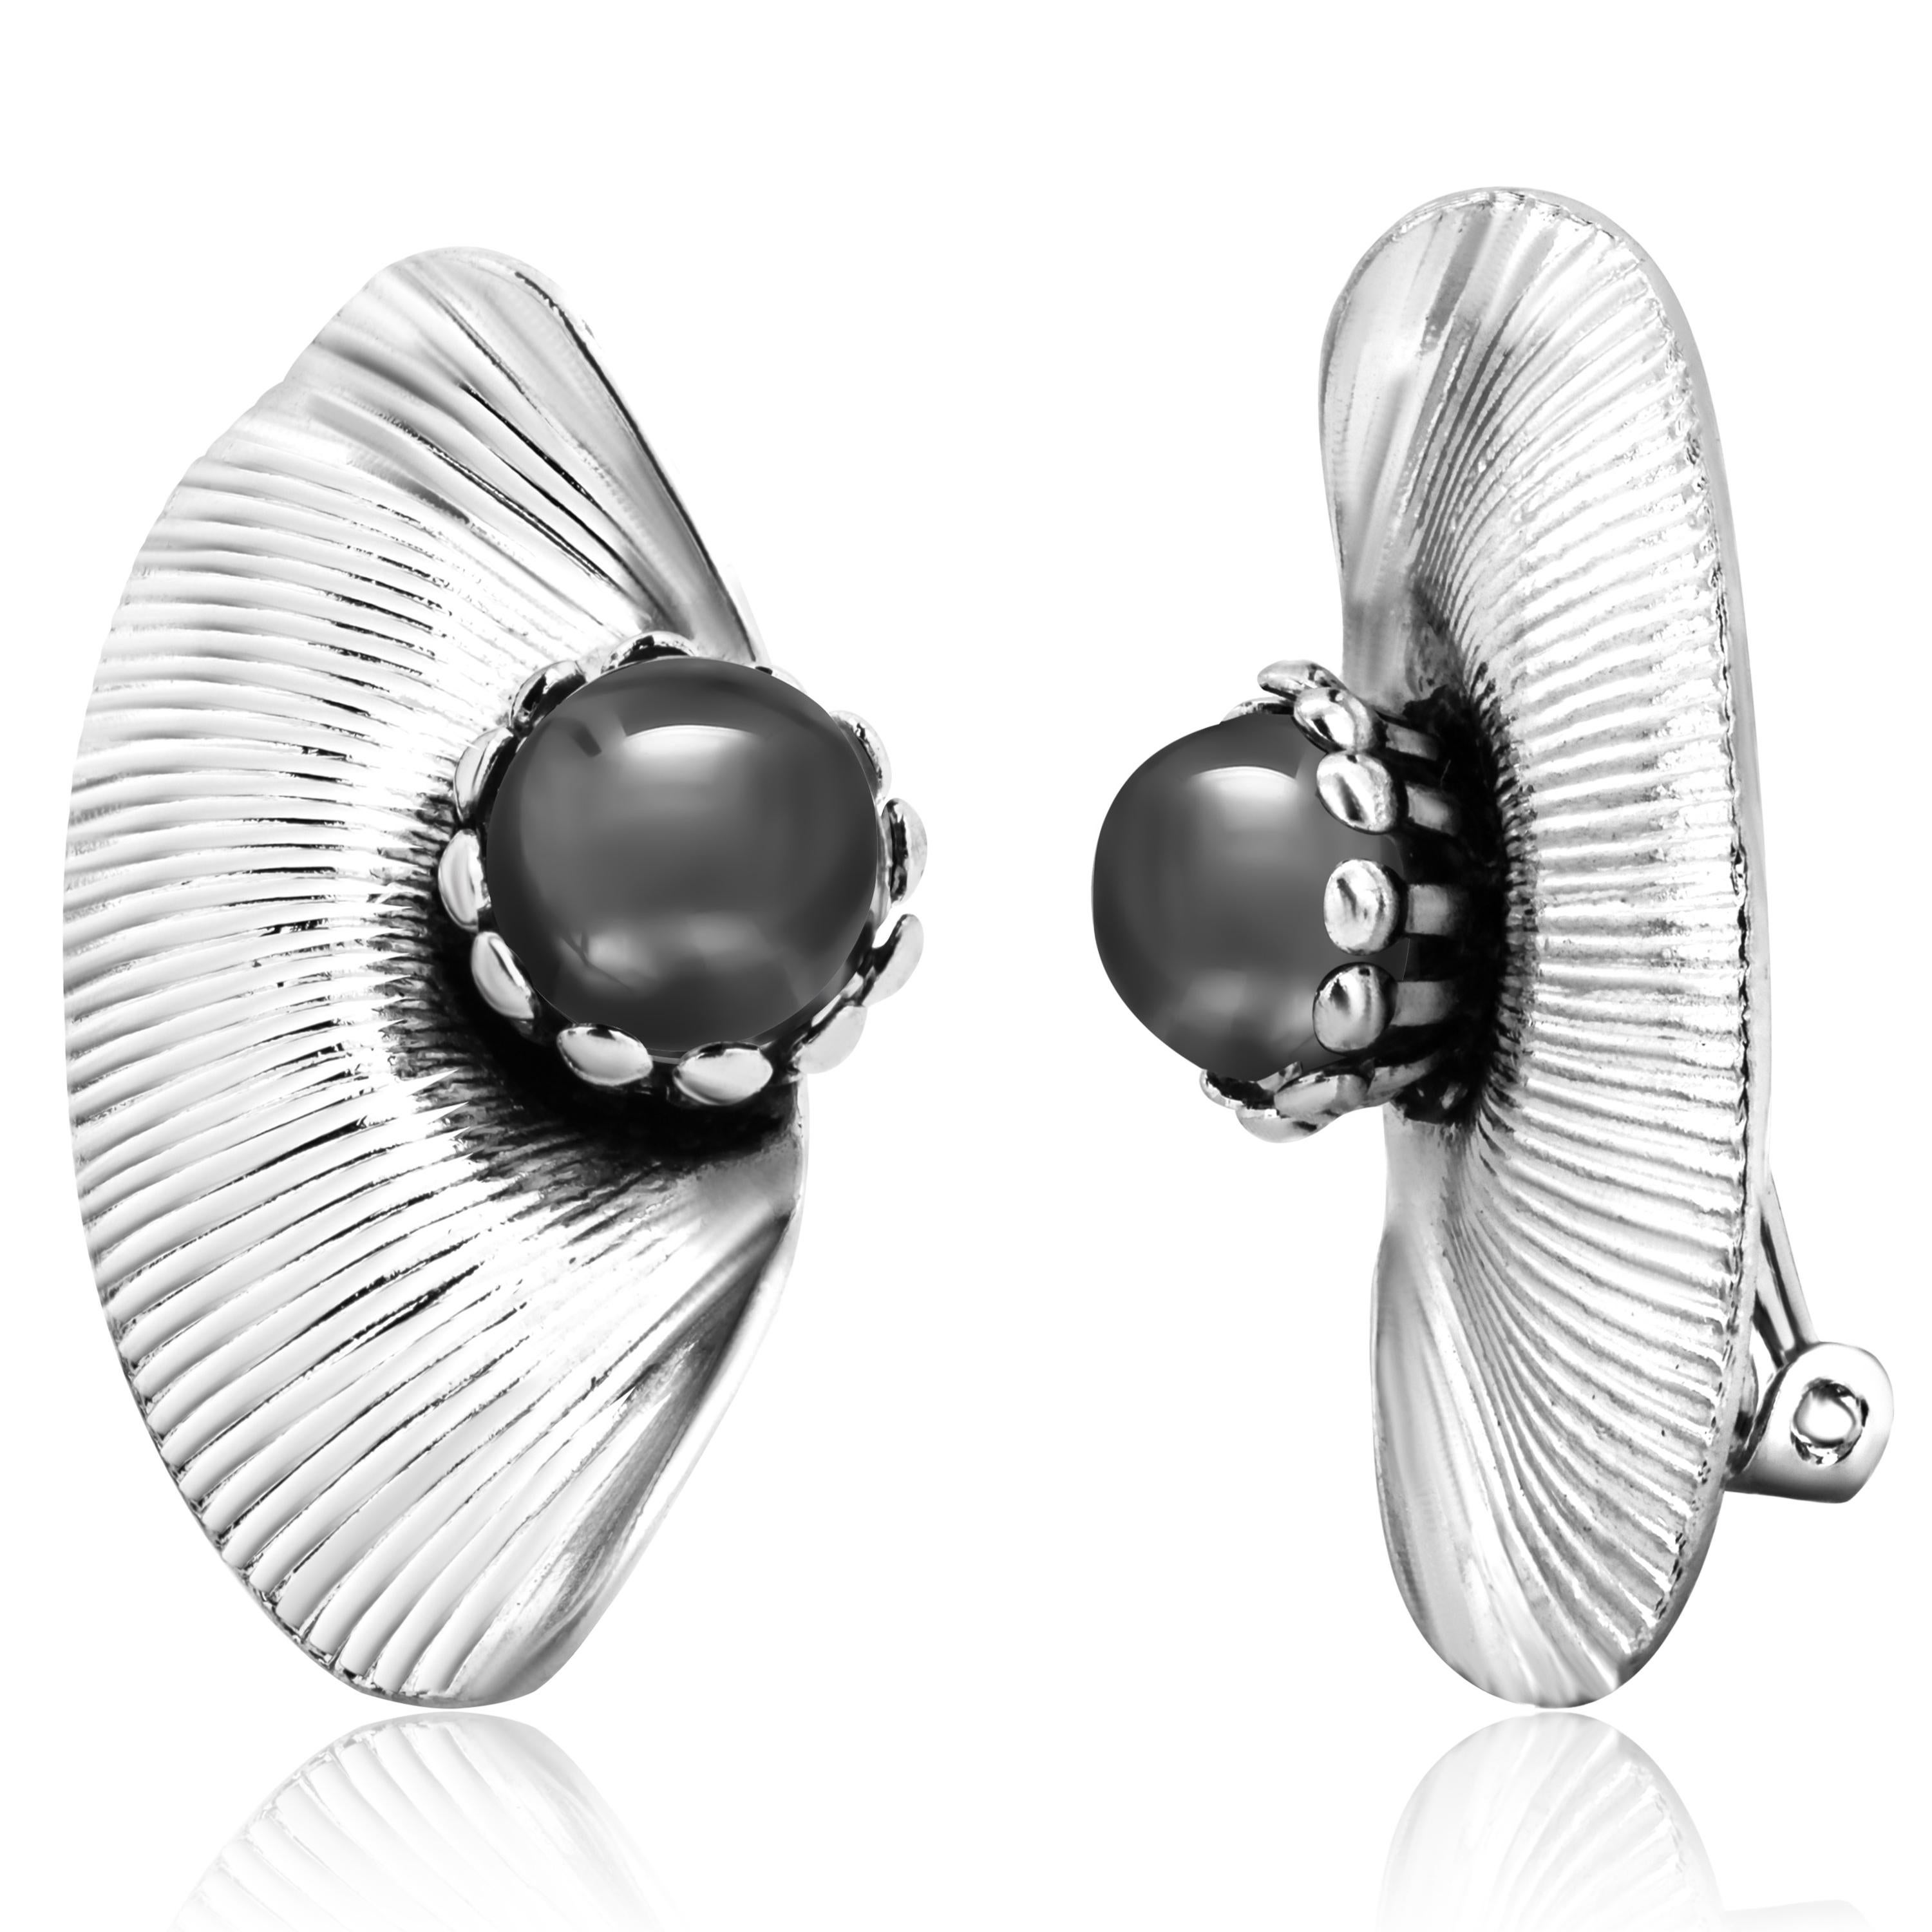 Cartier Vintage 1970 Silver Clip Earrings Black Stone 1.80 by 0.80 Inch Size In Good Condition For Sale In New York, NY